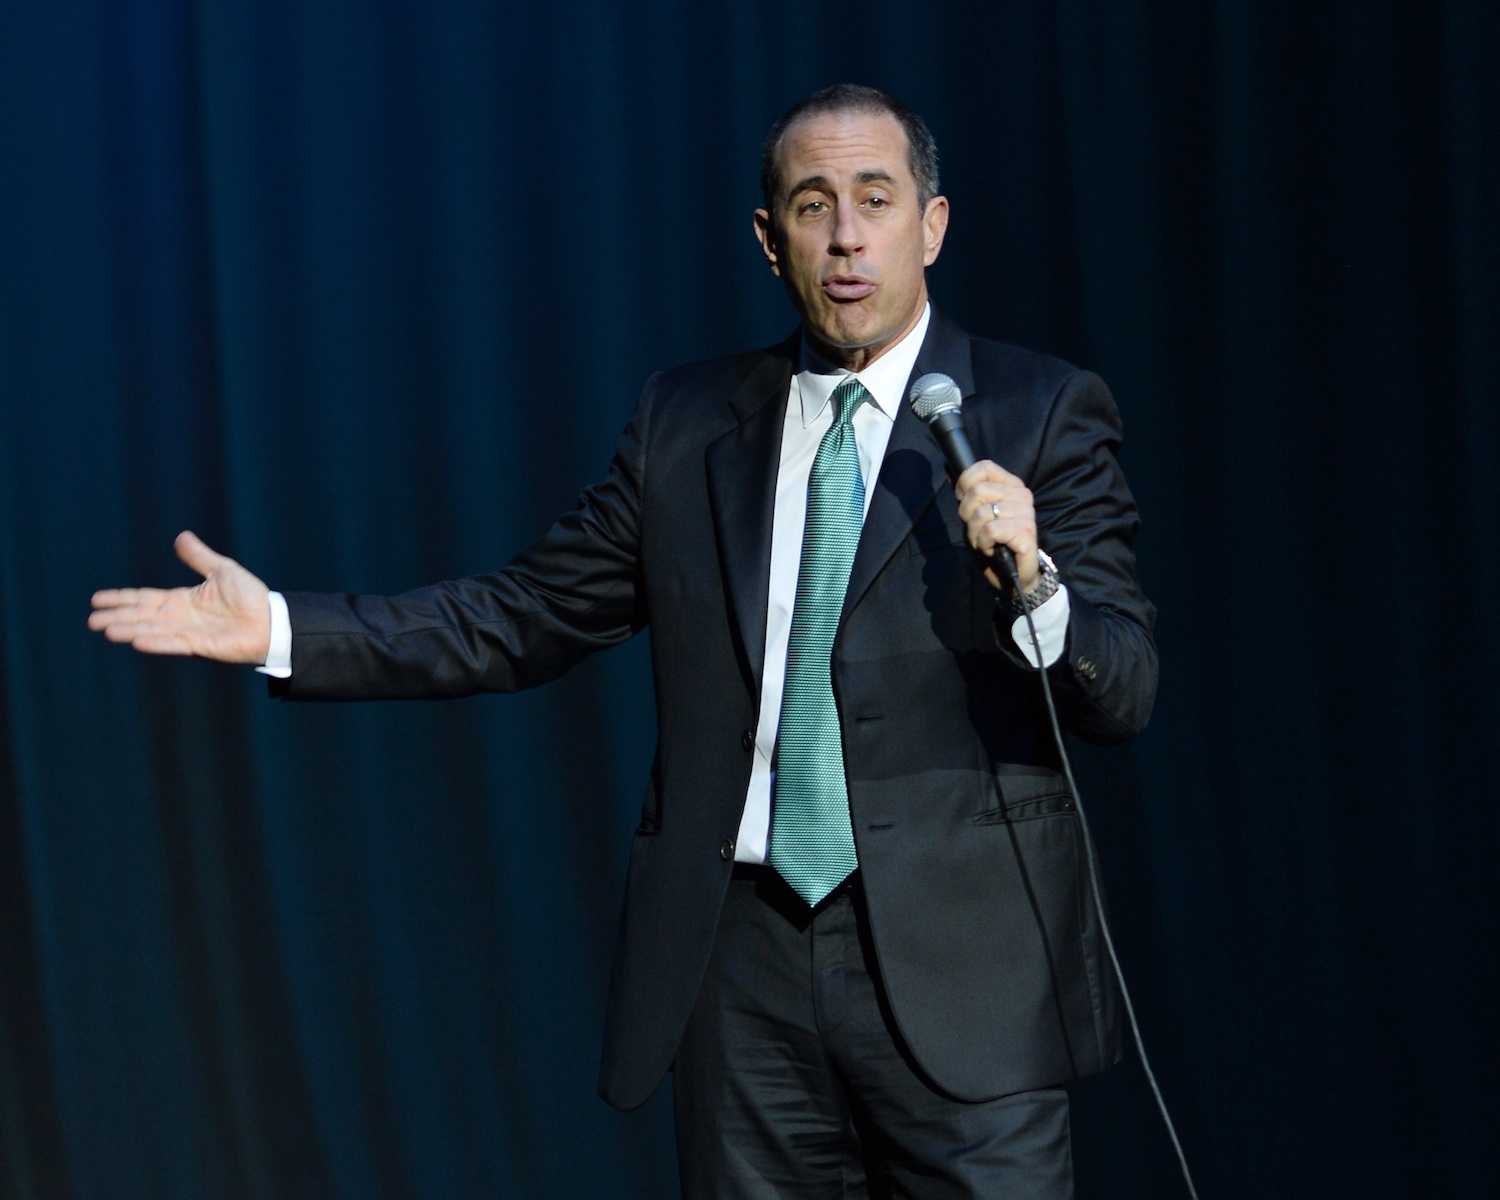 Jerry Seinfeld performs at Hard Rock Live! in Hollywood, Fla., on Jan. 31, 2014 (Larry Marano / Getty Images)